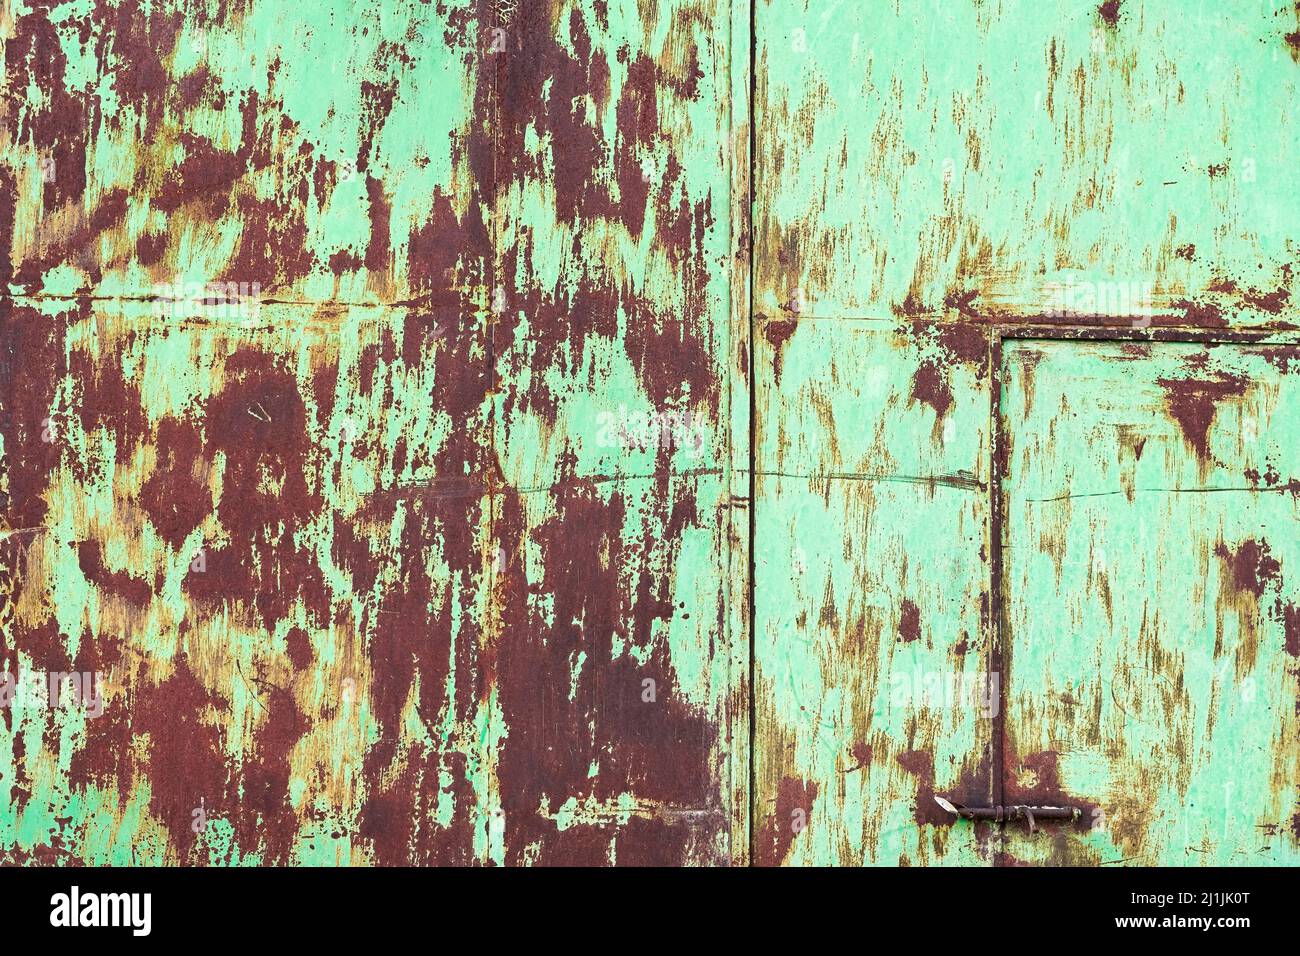 Rusty metal background with traces of gray paint. Stock Photo